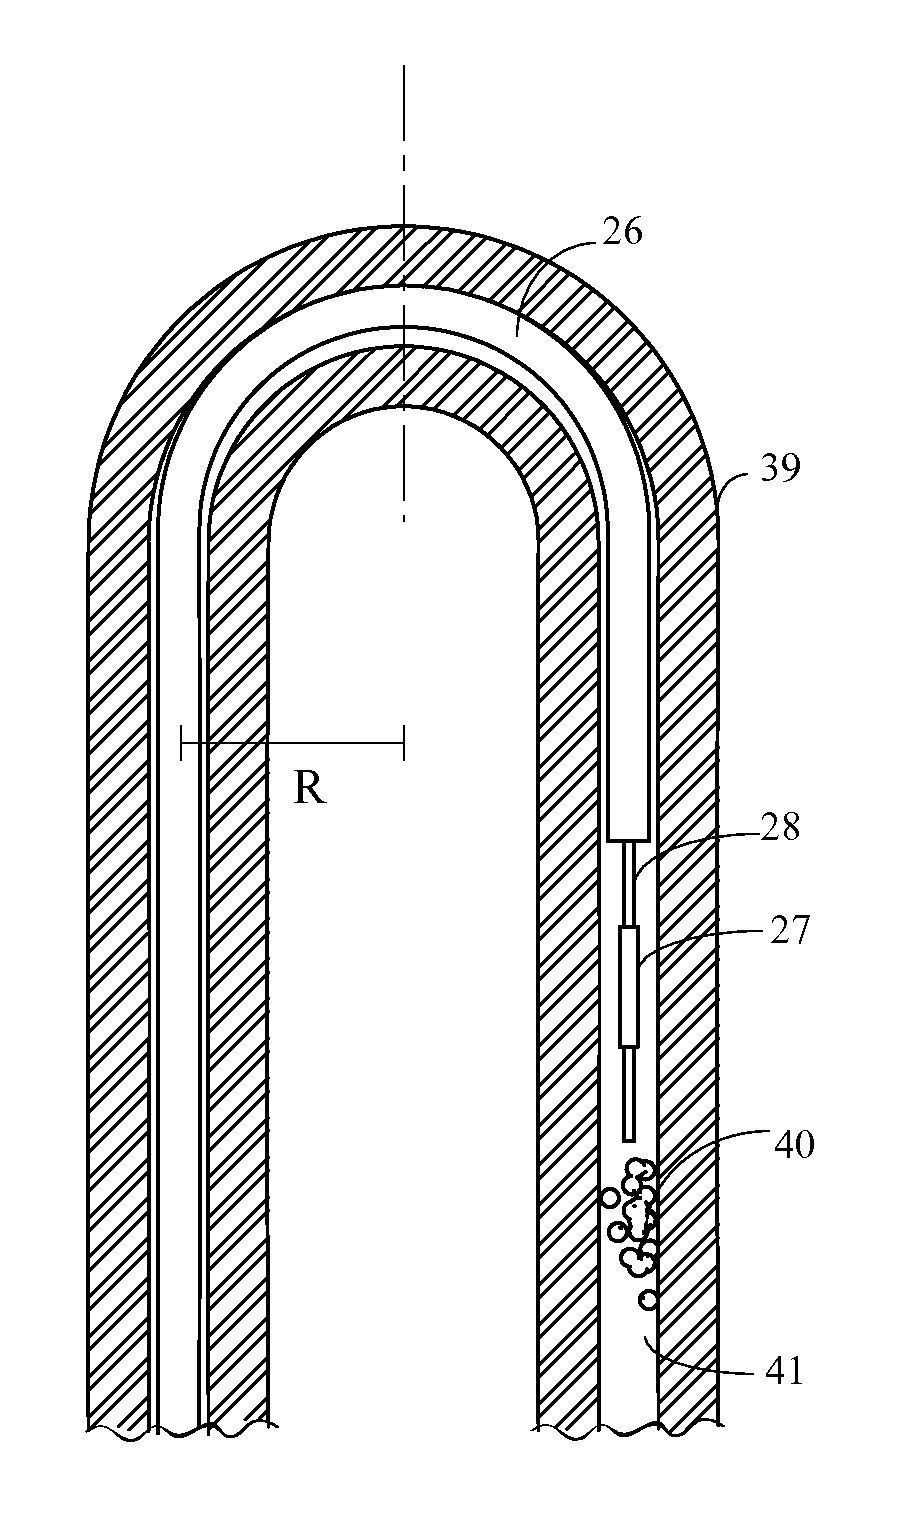 Devices for clearing blockages in in-situ artificial lumens